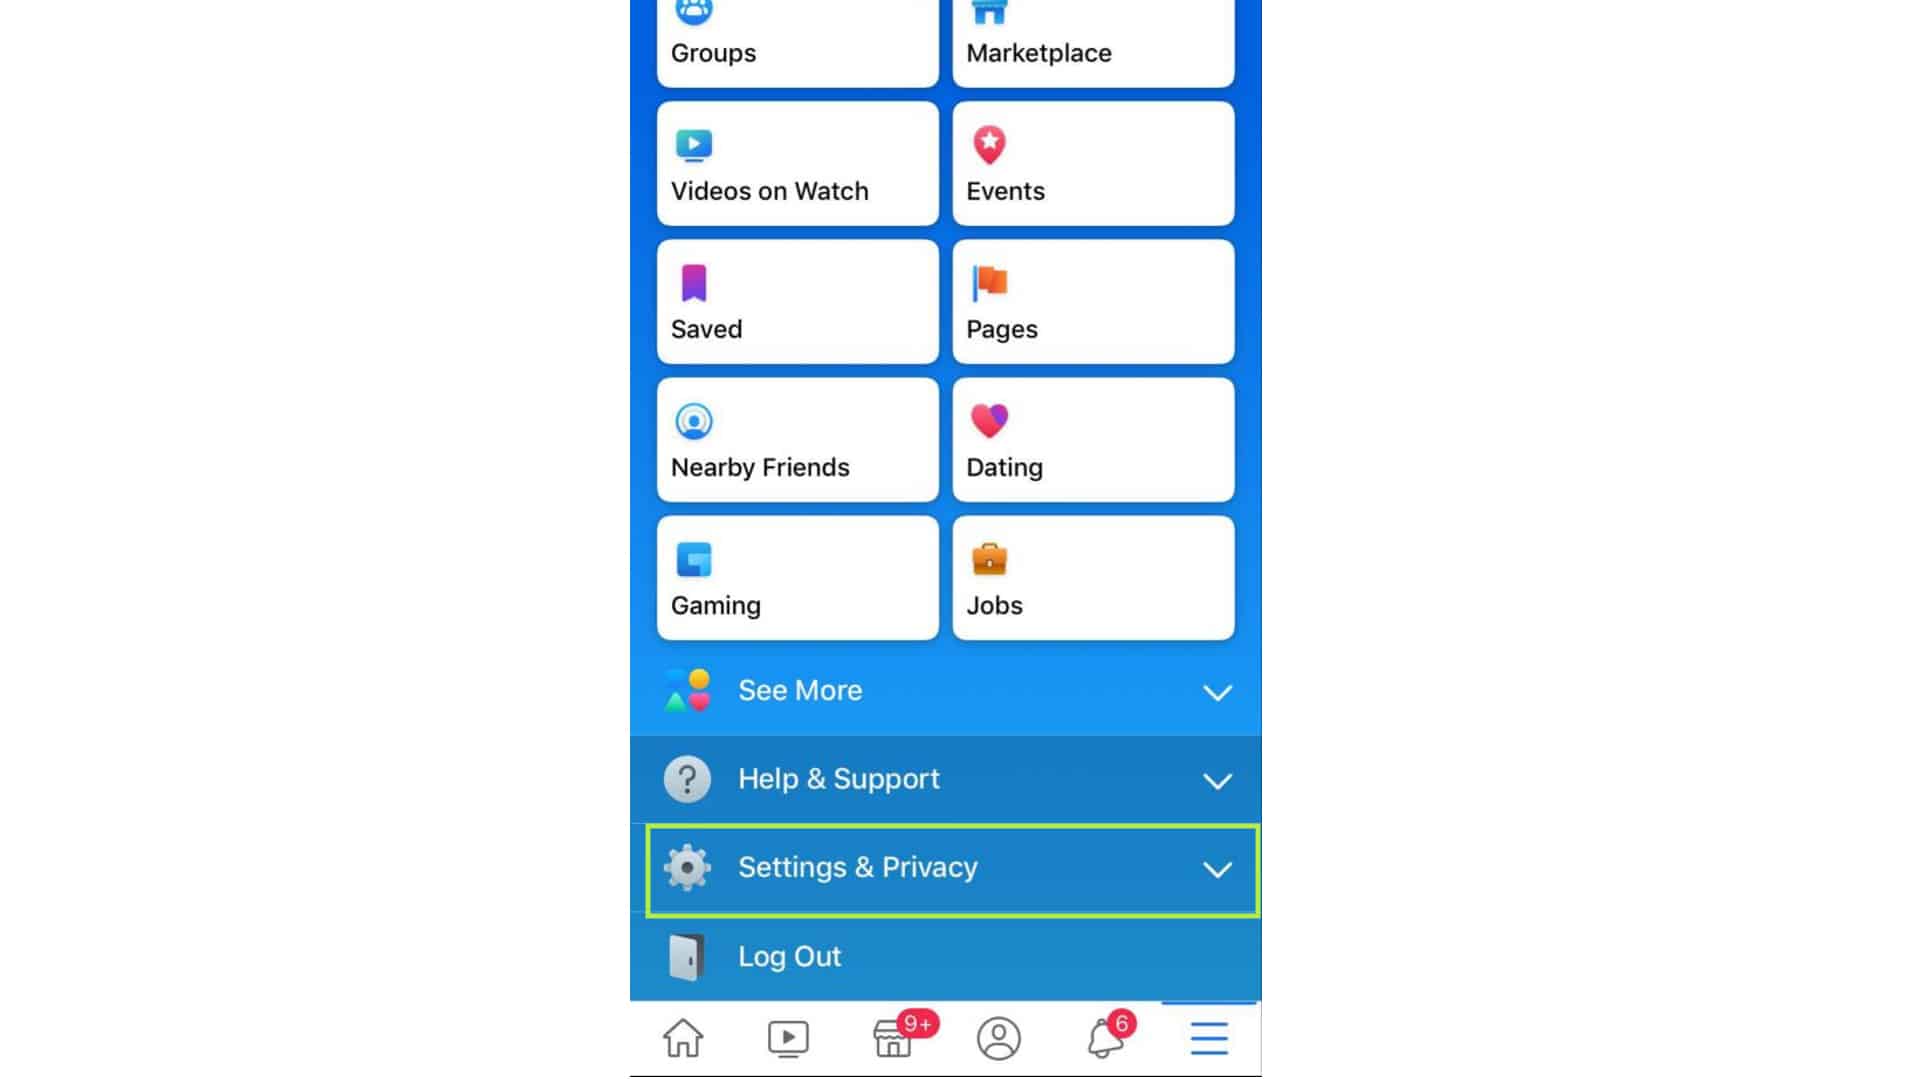 facebook settings and privacy